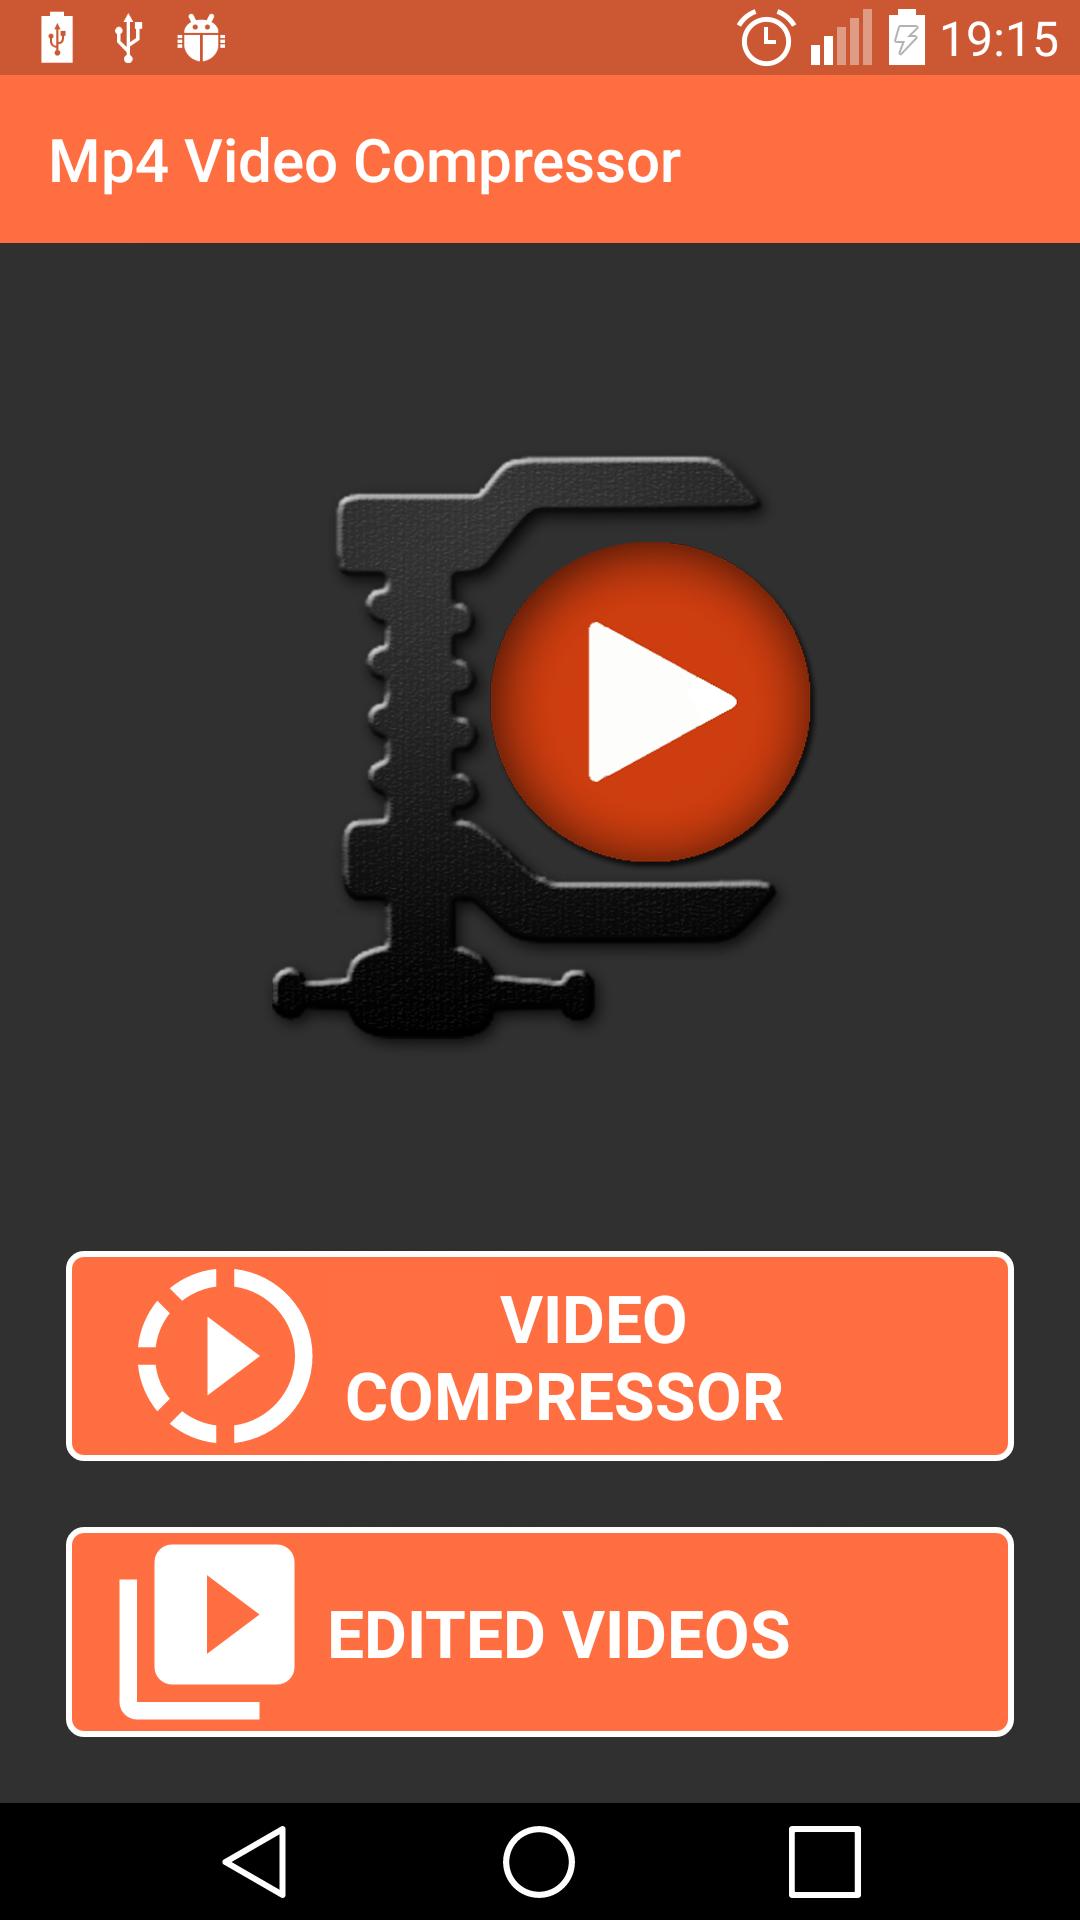 MP4 Video Compressor for Android - APK Download